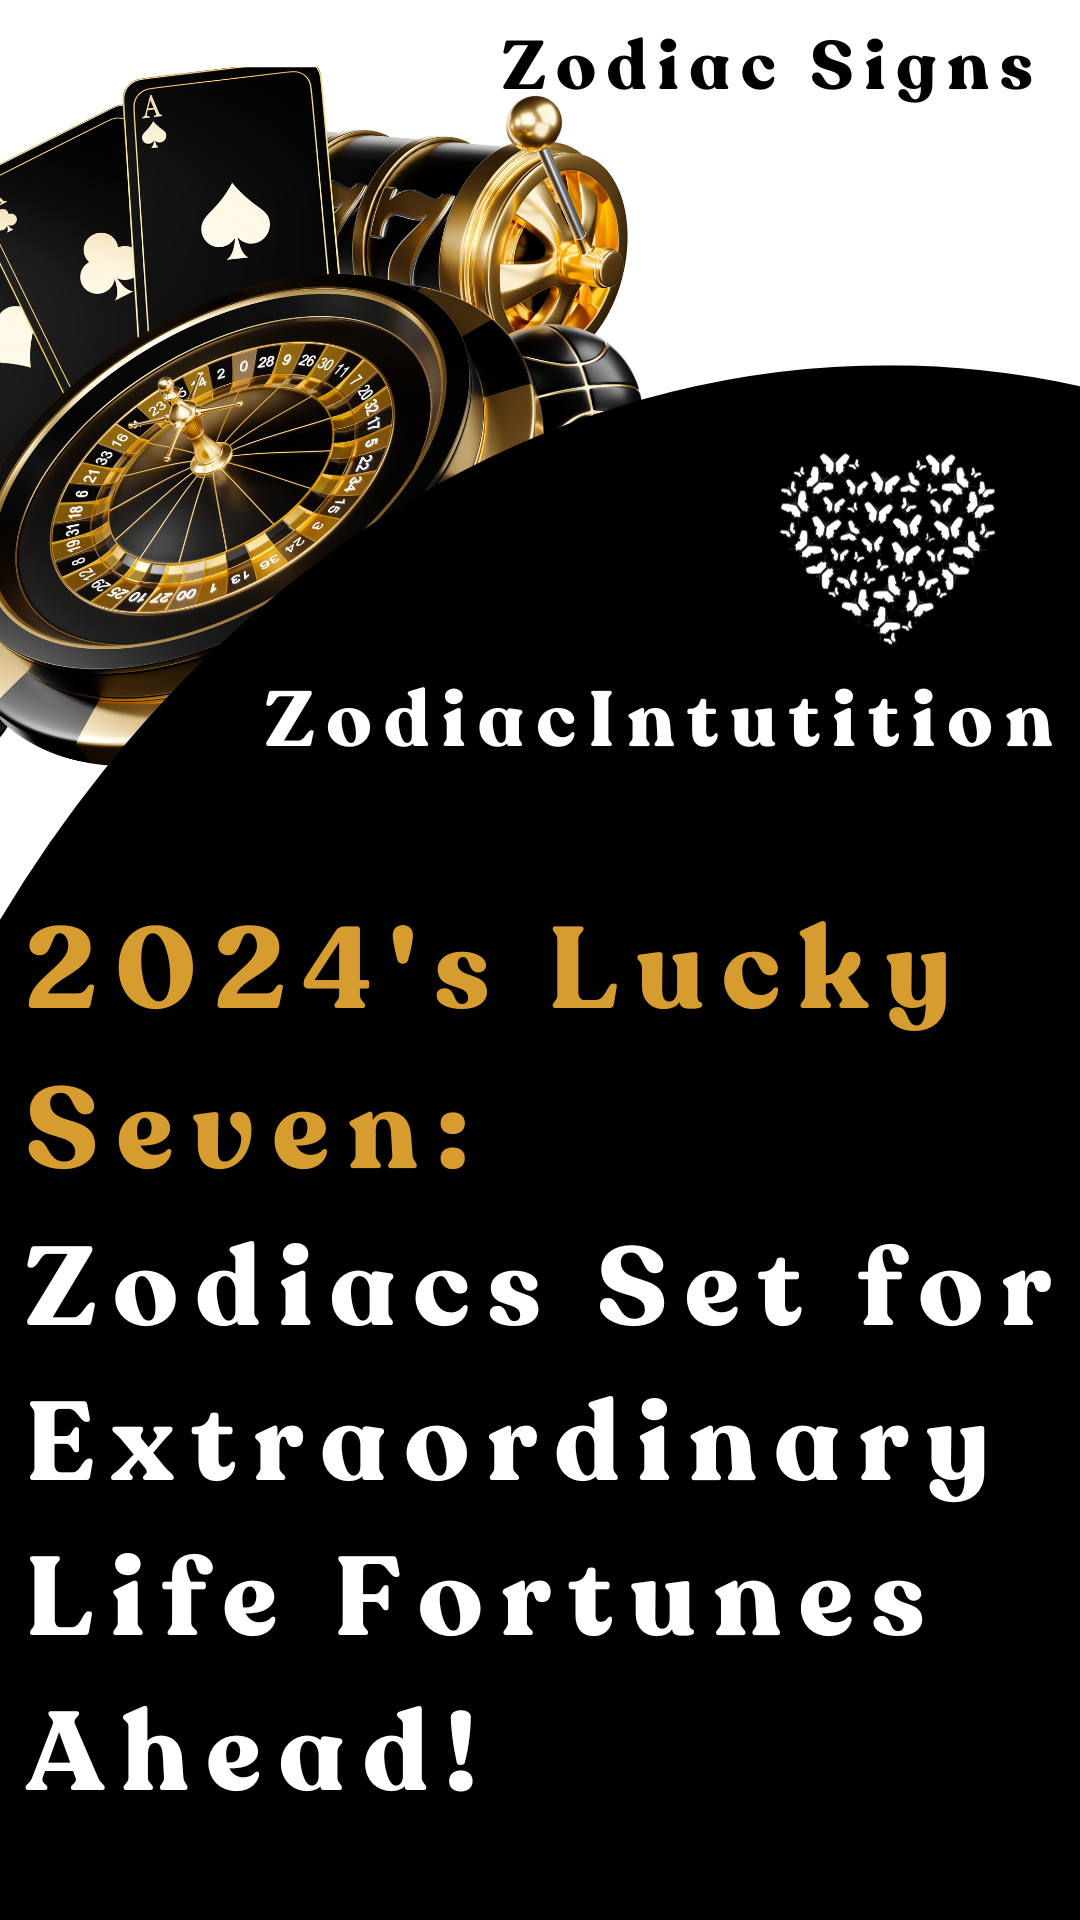 2024's Lucky Seven: Zodiacs Set for Extraordinary Life Fortunes Ahead!